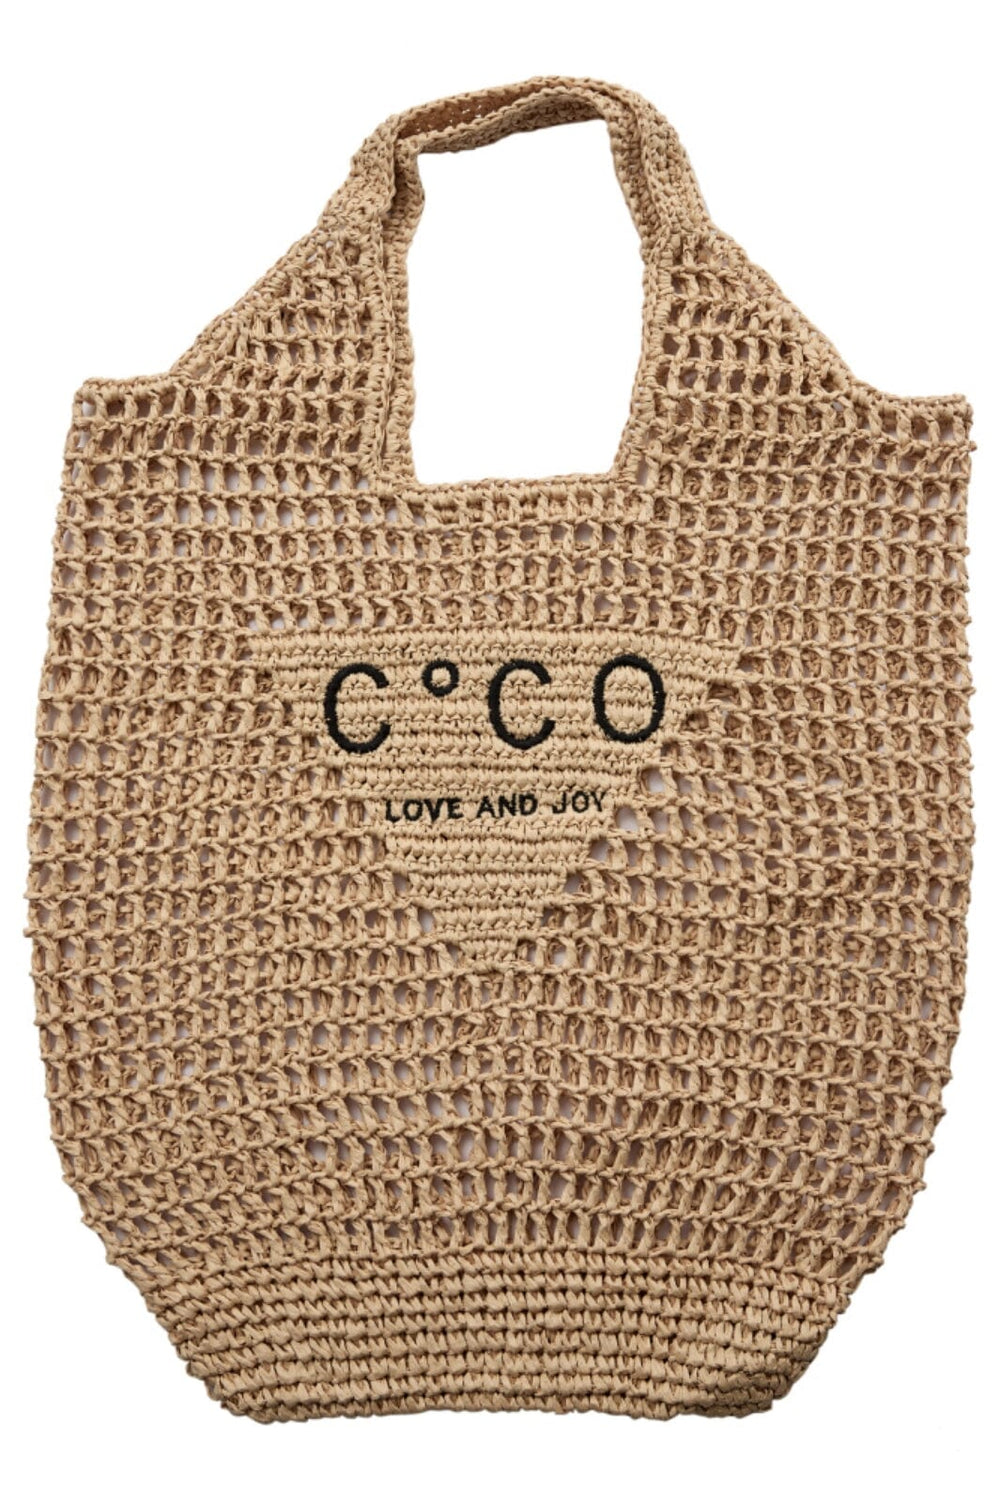 Co´couture - Cococc Tote Bag 39017 - 4085 Straw Tasker 